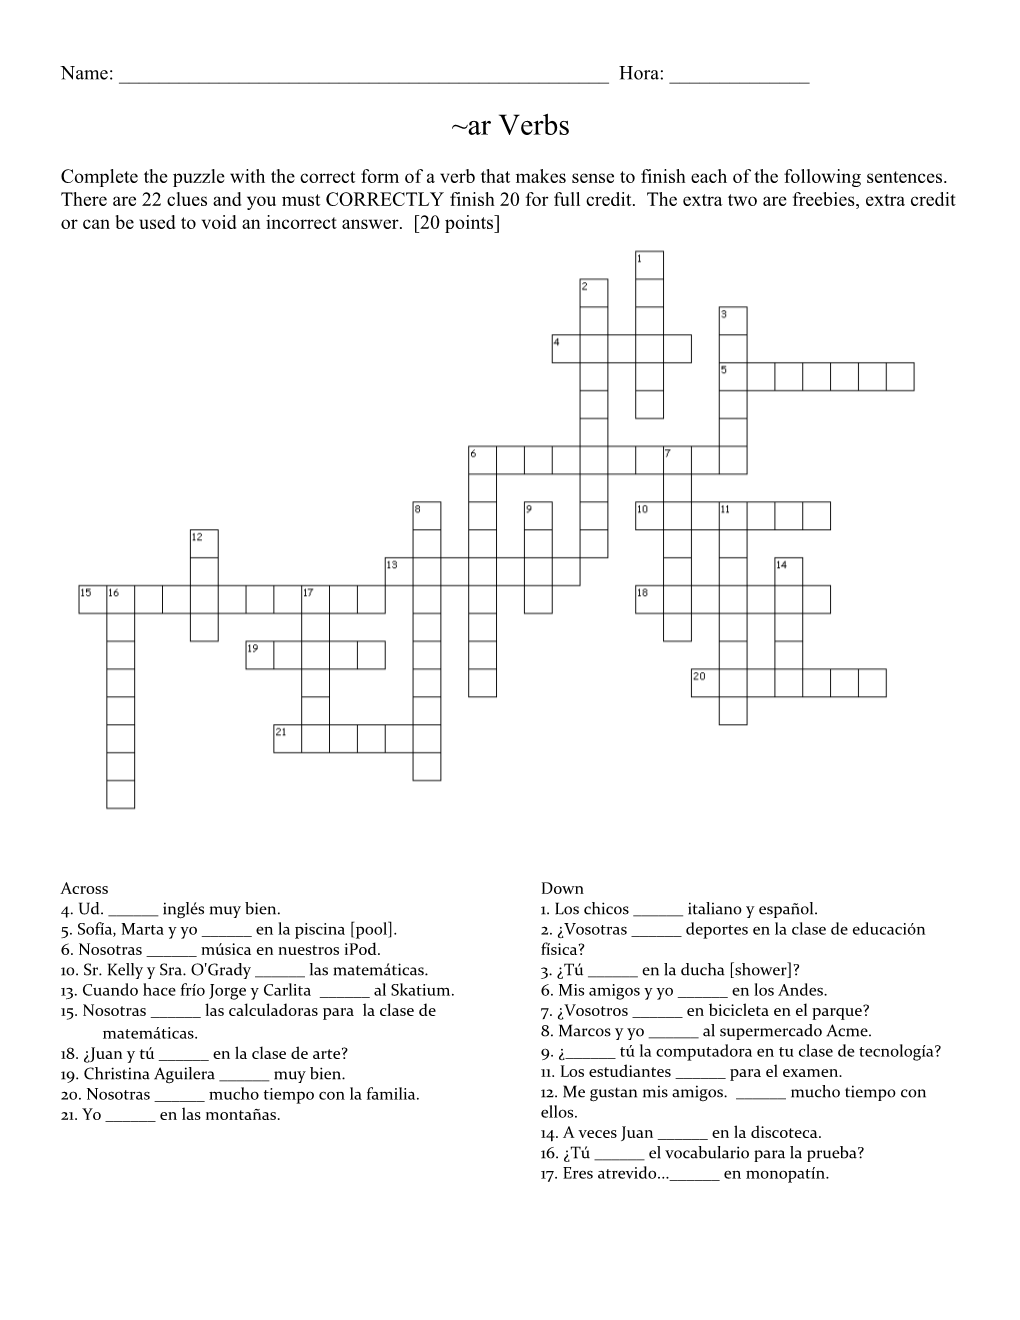 Complete the Puzzle with the Correct Form of a Verb That Makes Sense to Finish Each Of